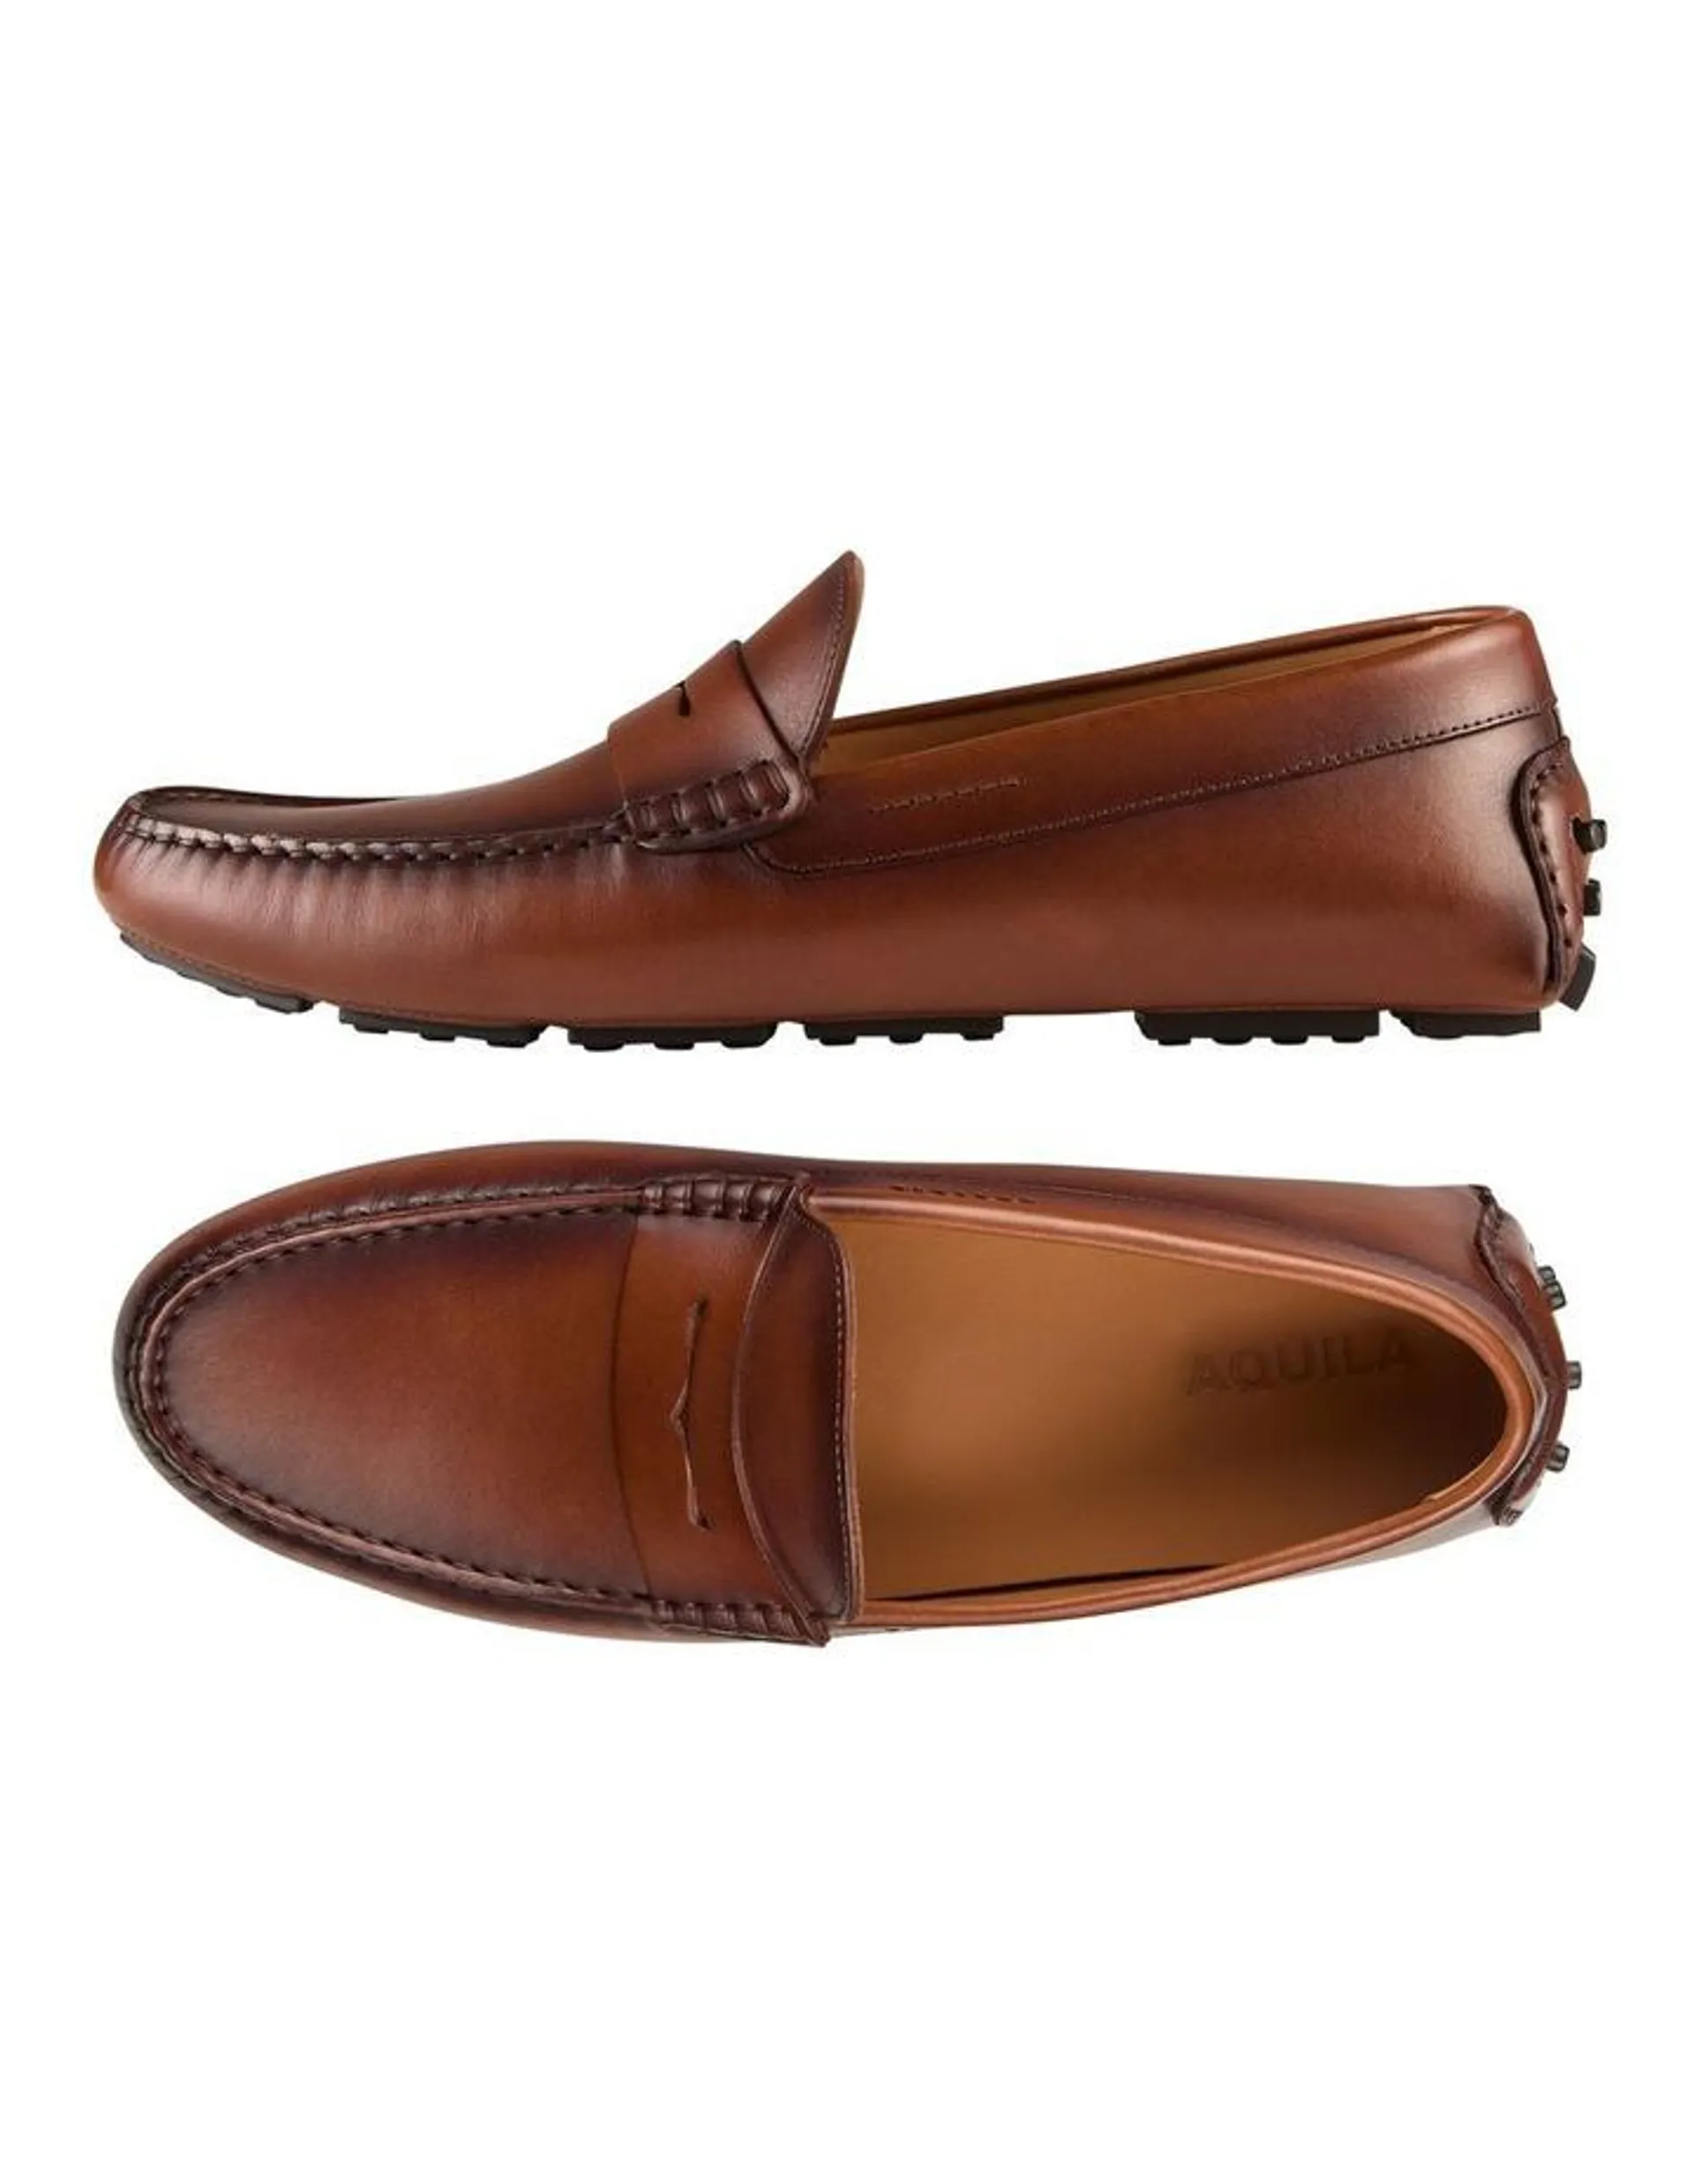 Daytona Leather Driving Shoes in Brandy